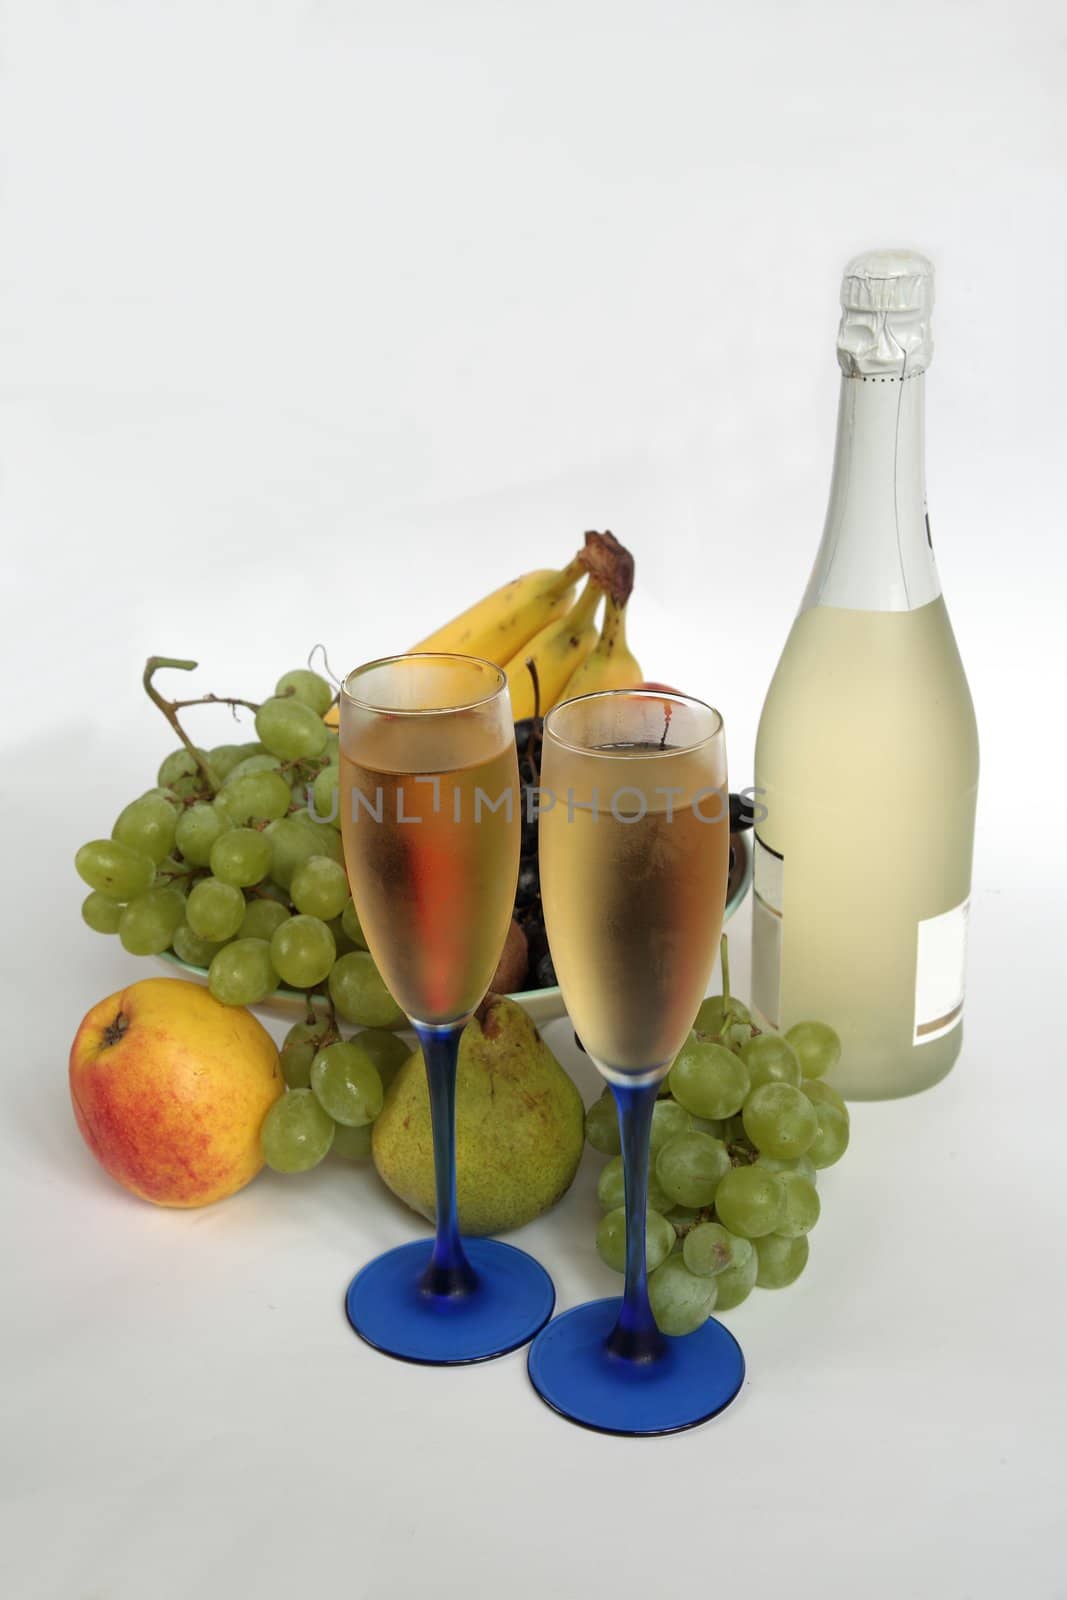 Champagne in glasses and fresh fruits; grapes,apples,pear and banana.